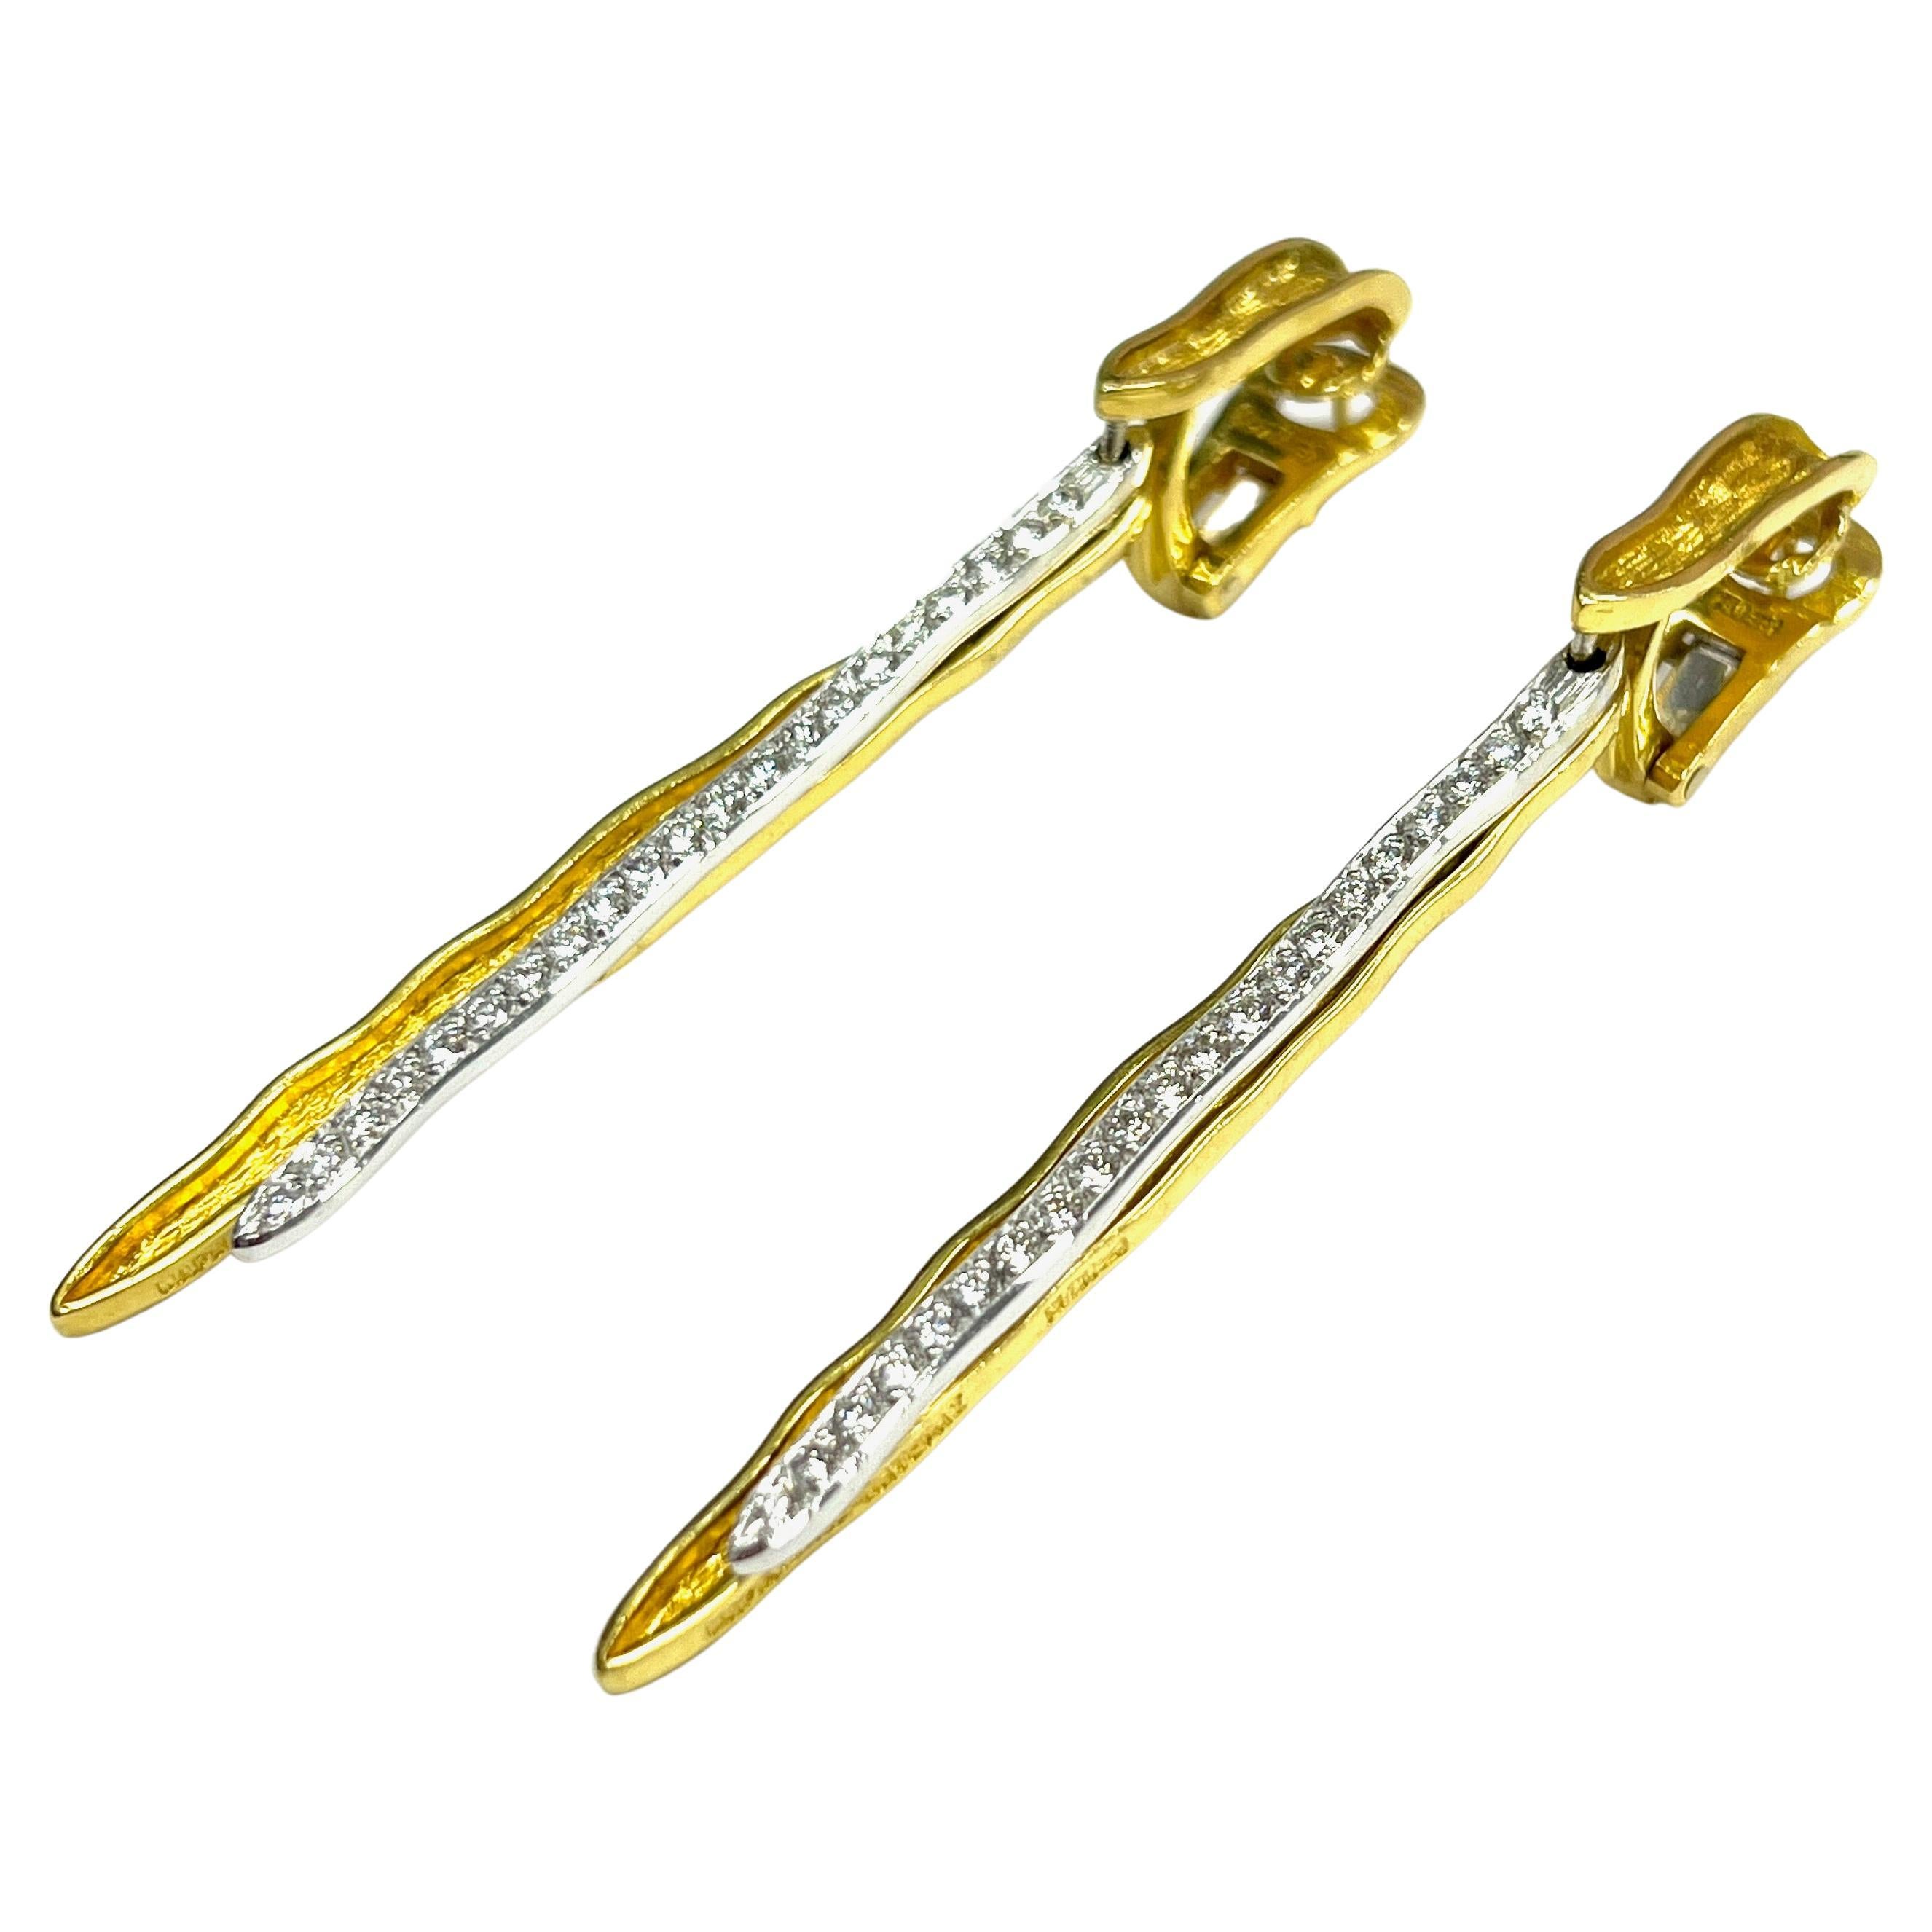 Maramenos & Pateras Icicle Diamond Yellow Gold Earrings

Forty-two round brilliant cut diamonds of approximately 0.84 carats total, with VS2 clarity and H color; set on 18 karat yellow gold; marked Maramenos & Pateras, 750

Size: width 0.25 inch,